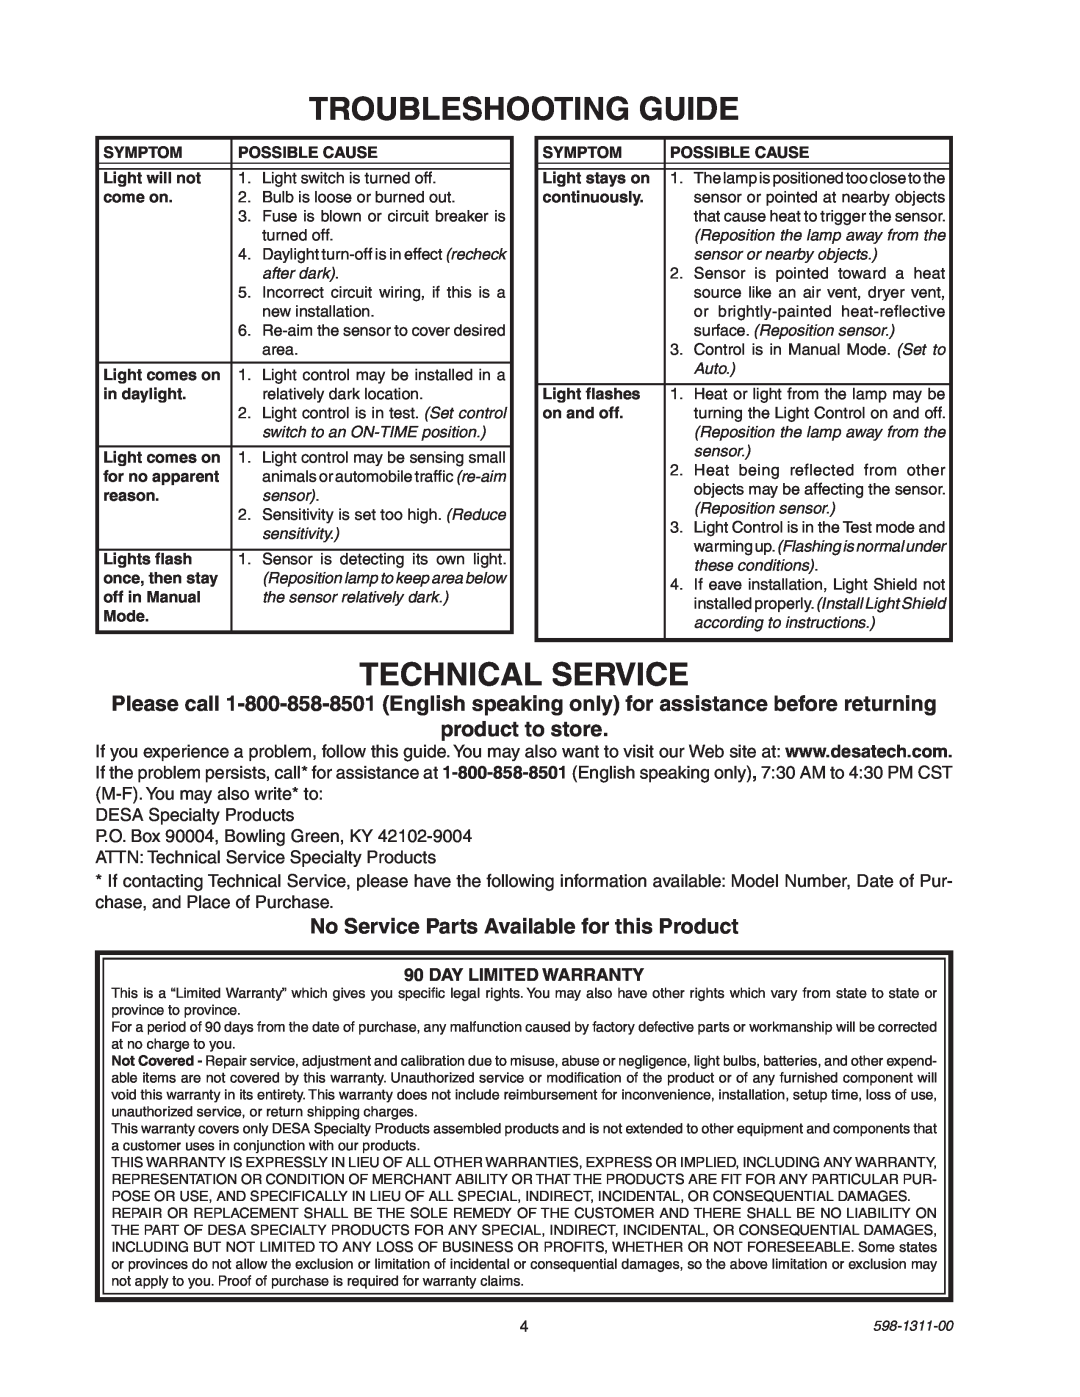 Desa 5525 manual Troubleshooting Guide, Technical Service, product to store, No Service Parts Available for this Product 